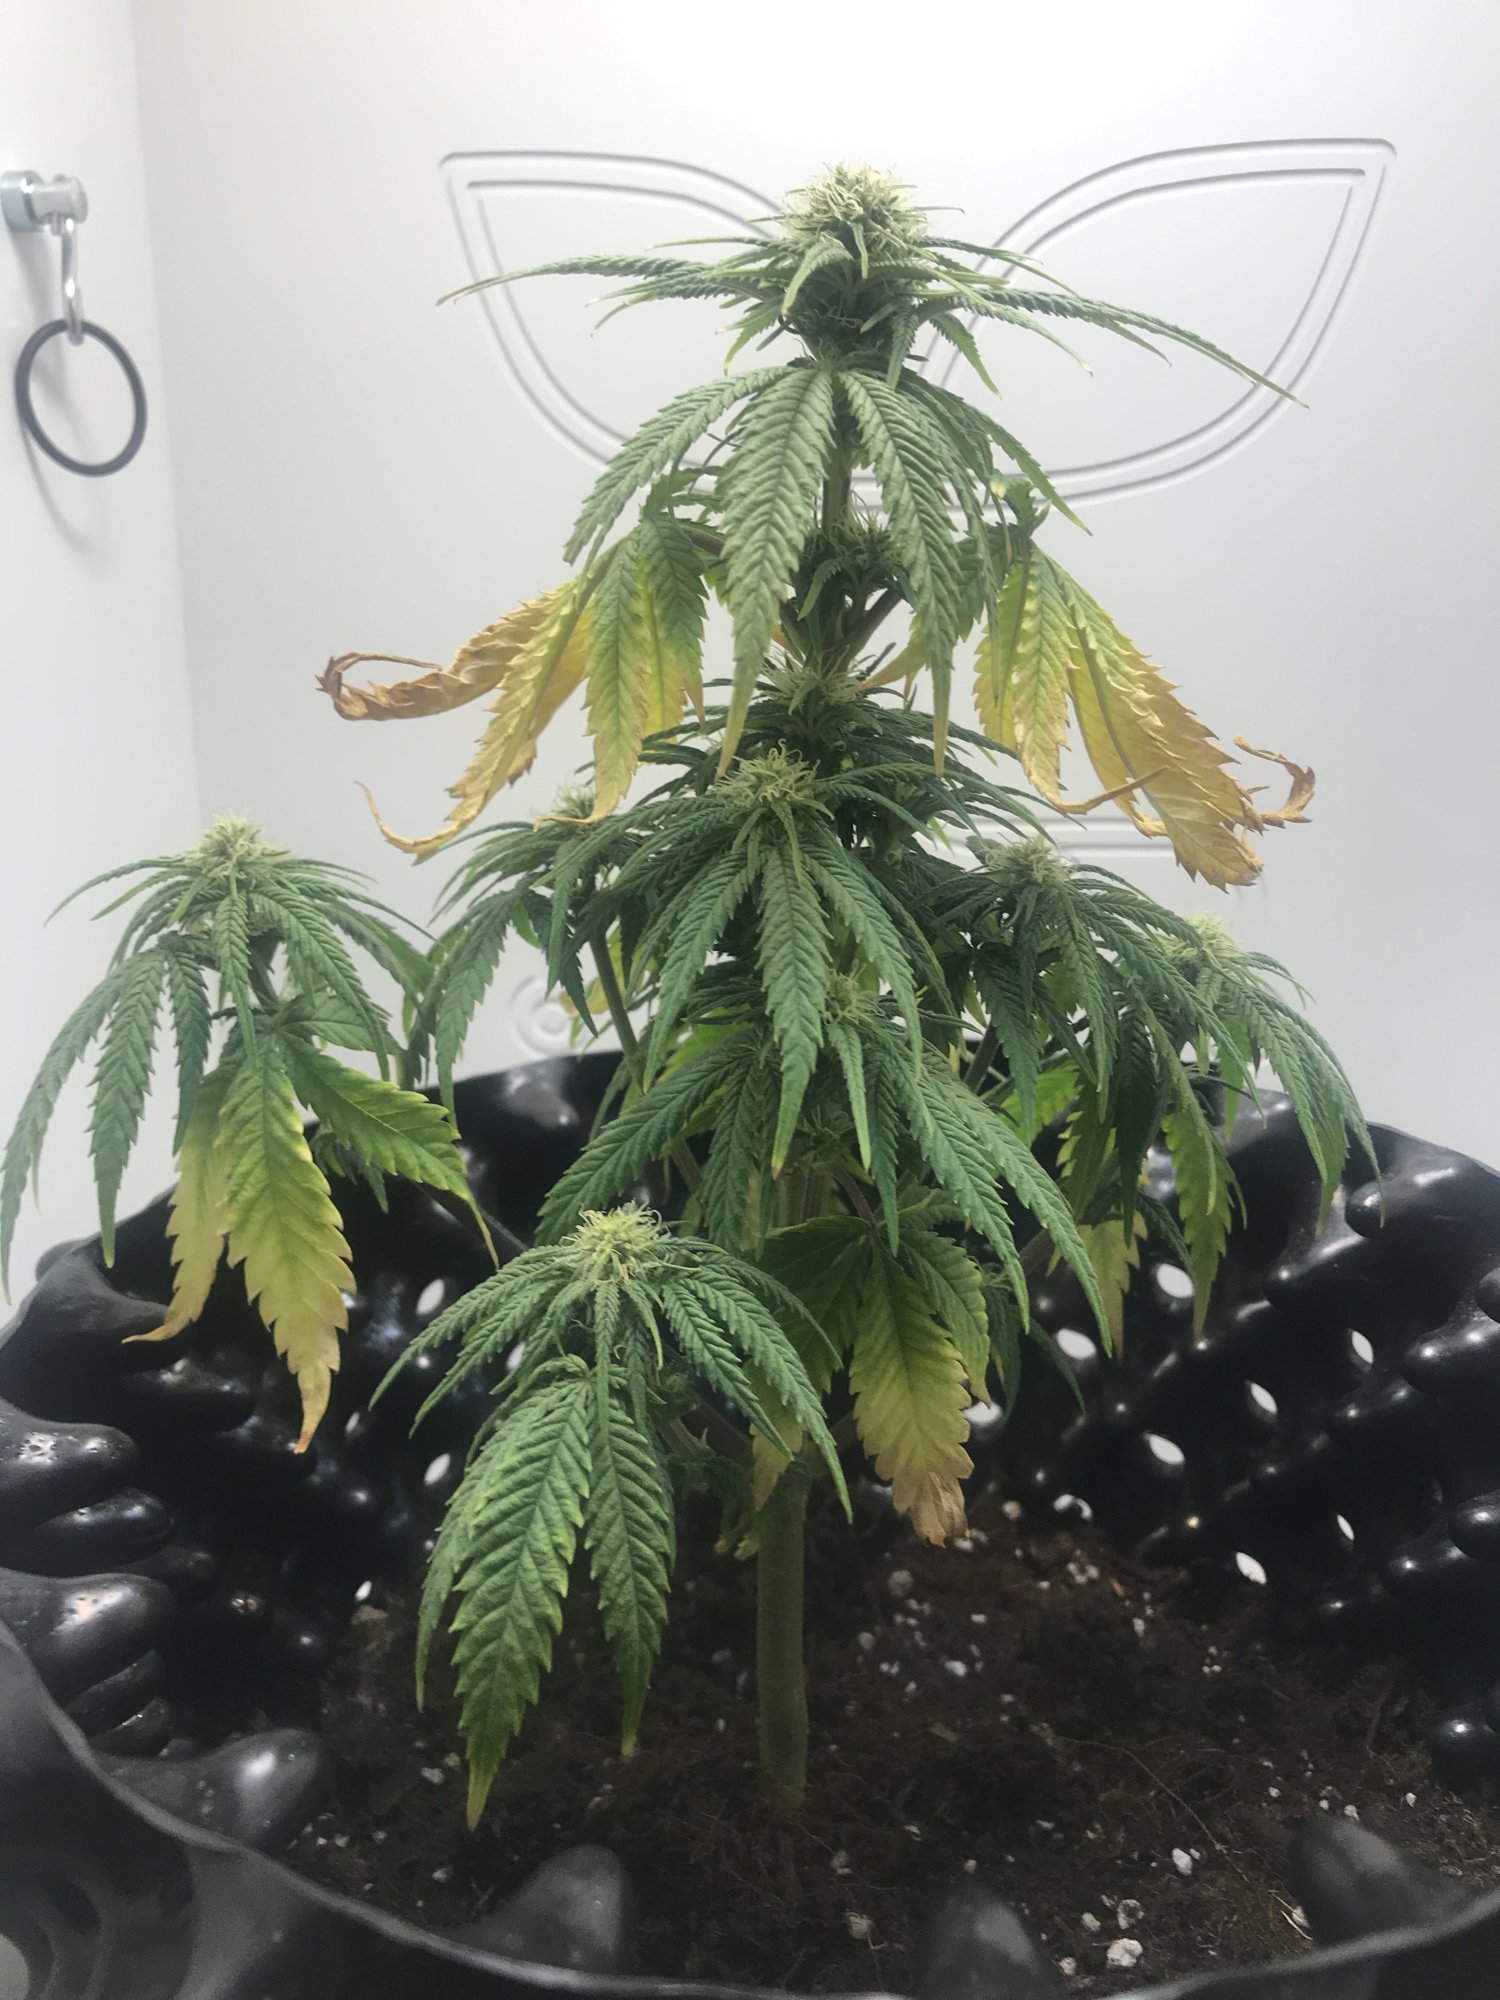 Is this a root issue nute deficiency or something else 3